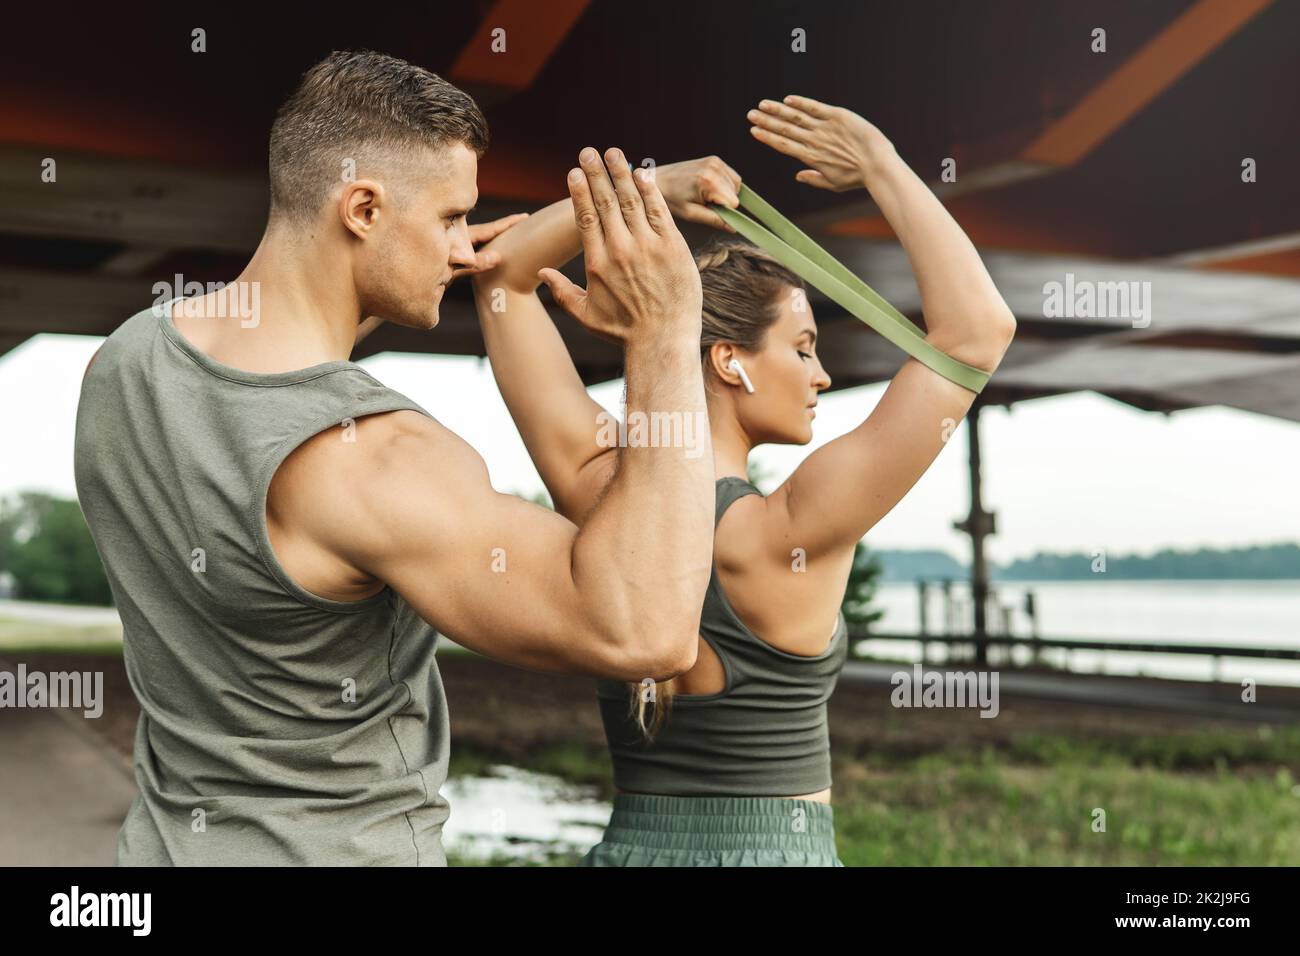 Woman during workout with a personal fitness instructor using rubber resistance bands outdoors Stock Photo